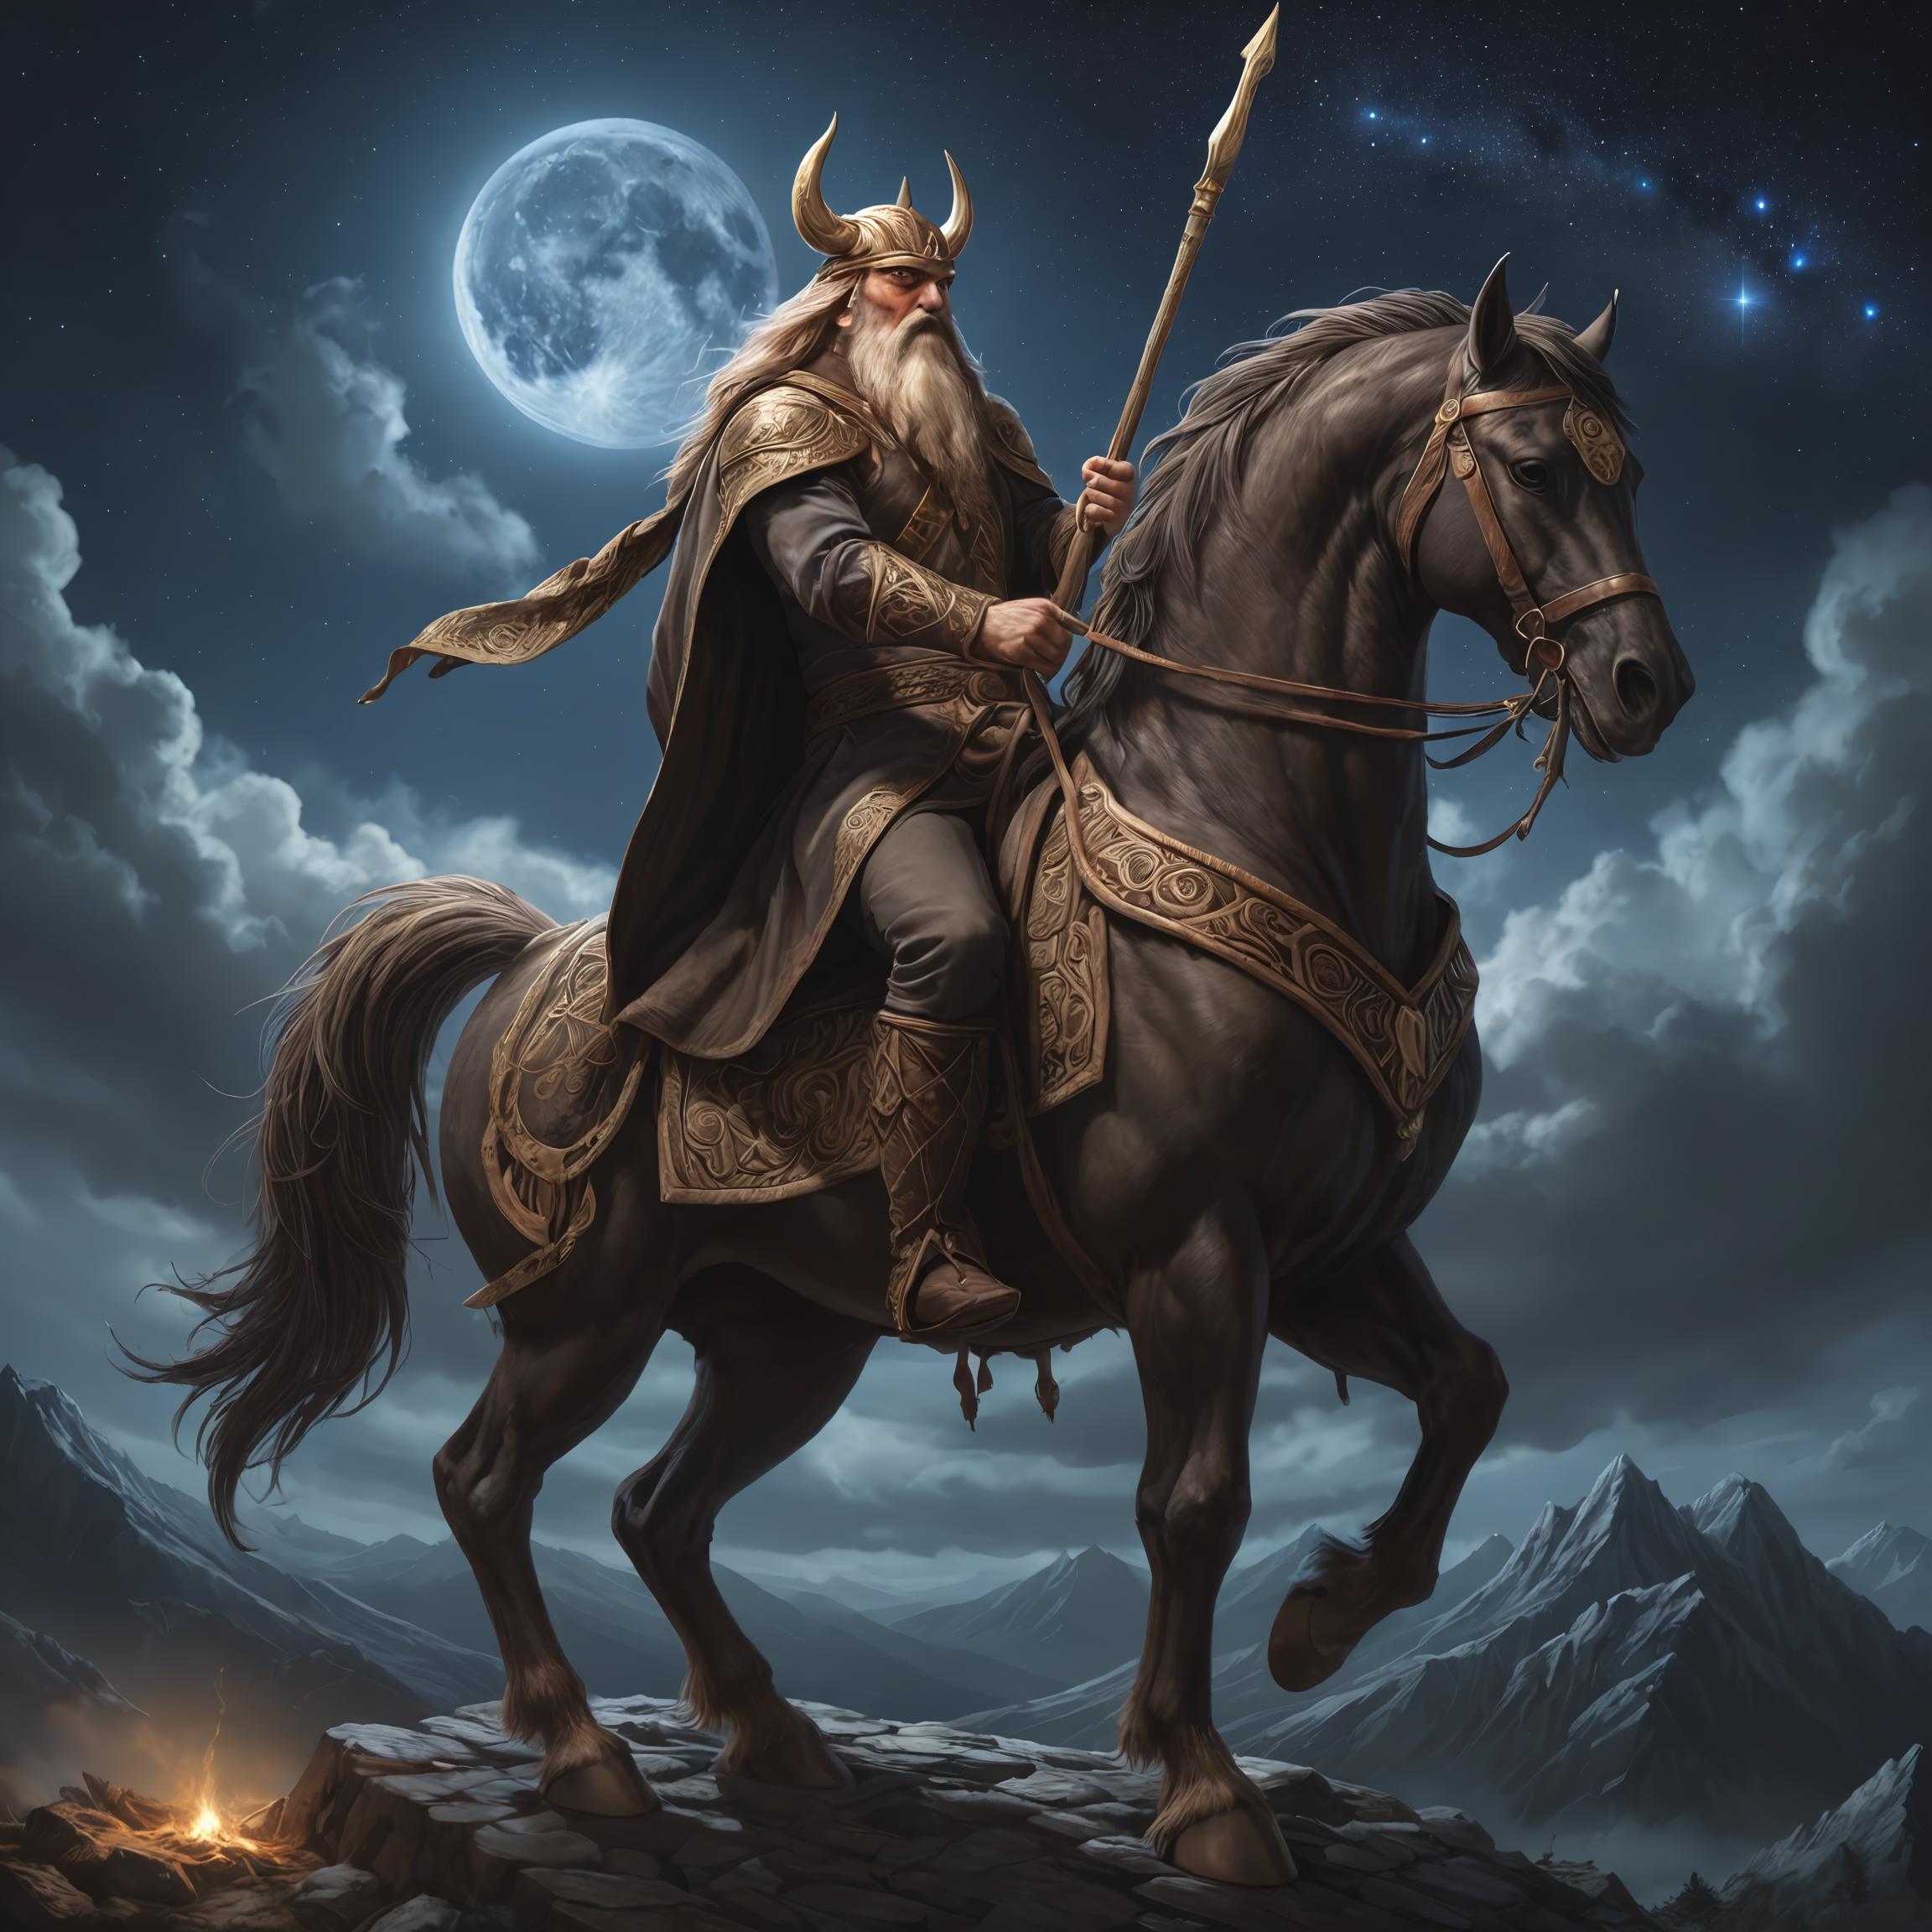 A man in a wizard costume riding a horse on a mountain